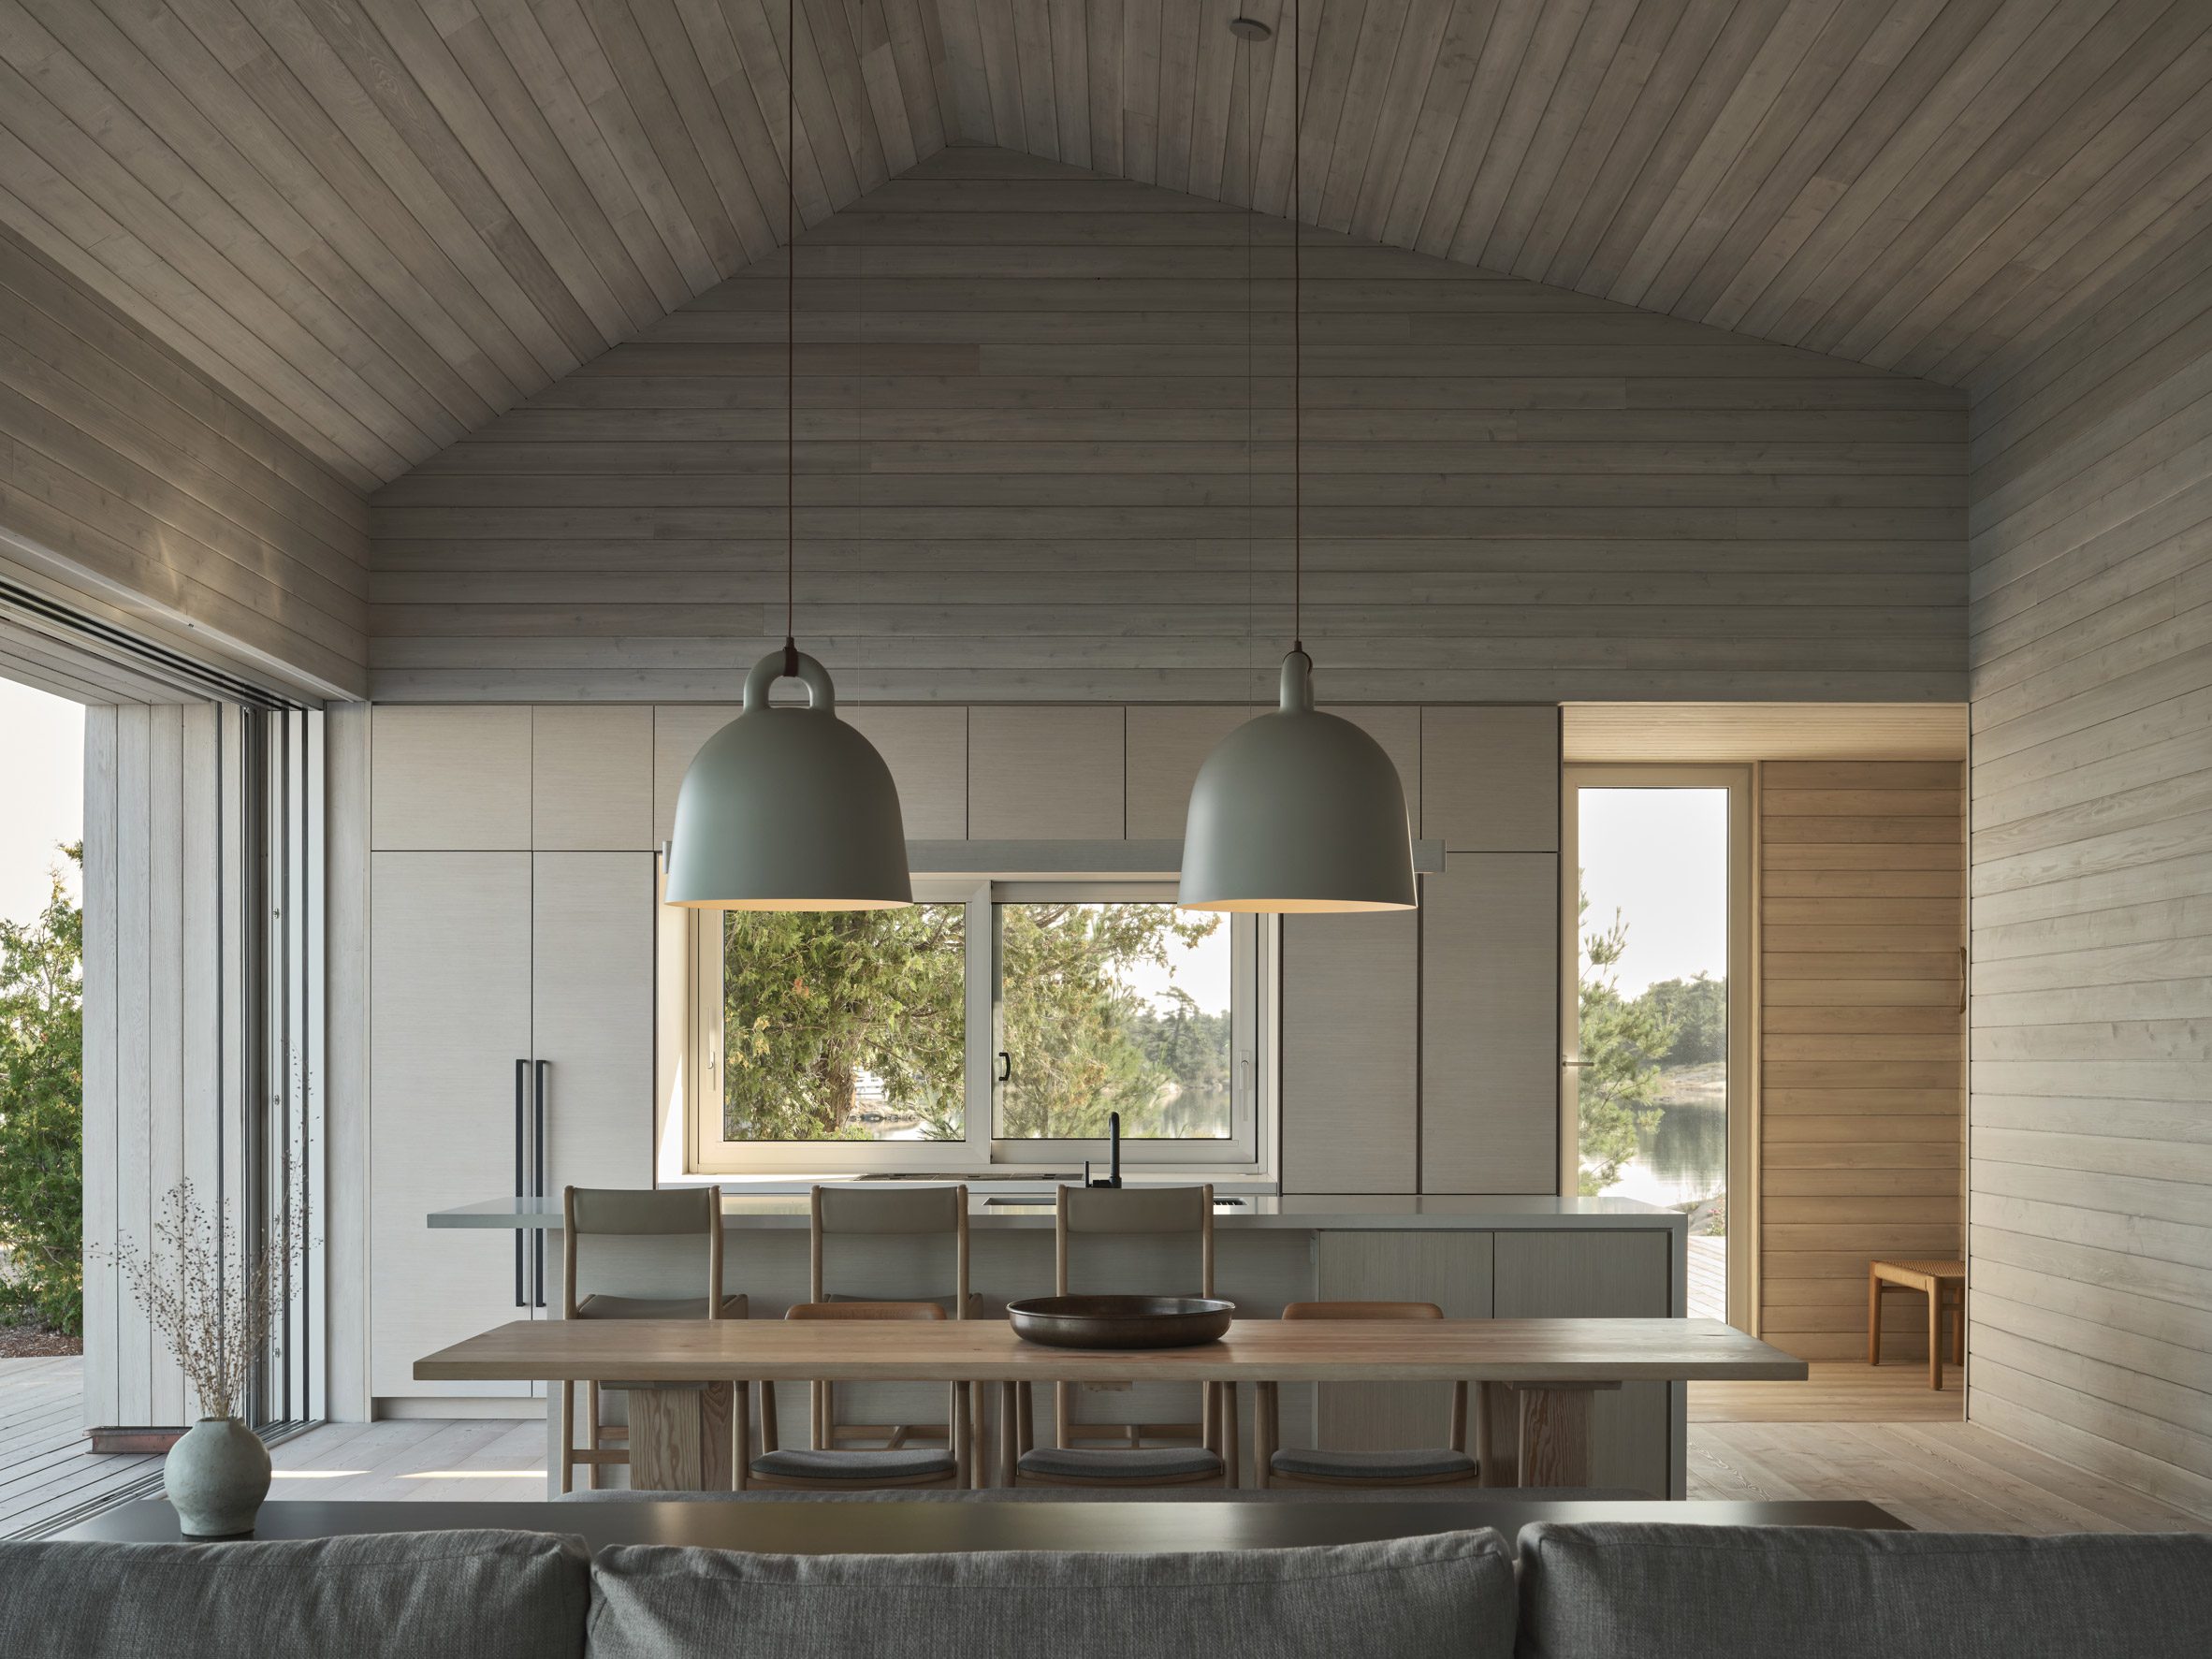 Open-plan kitchen and dining area clad in whitewashed cedar boards